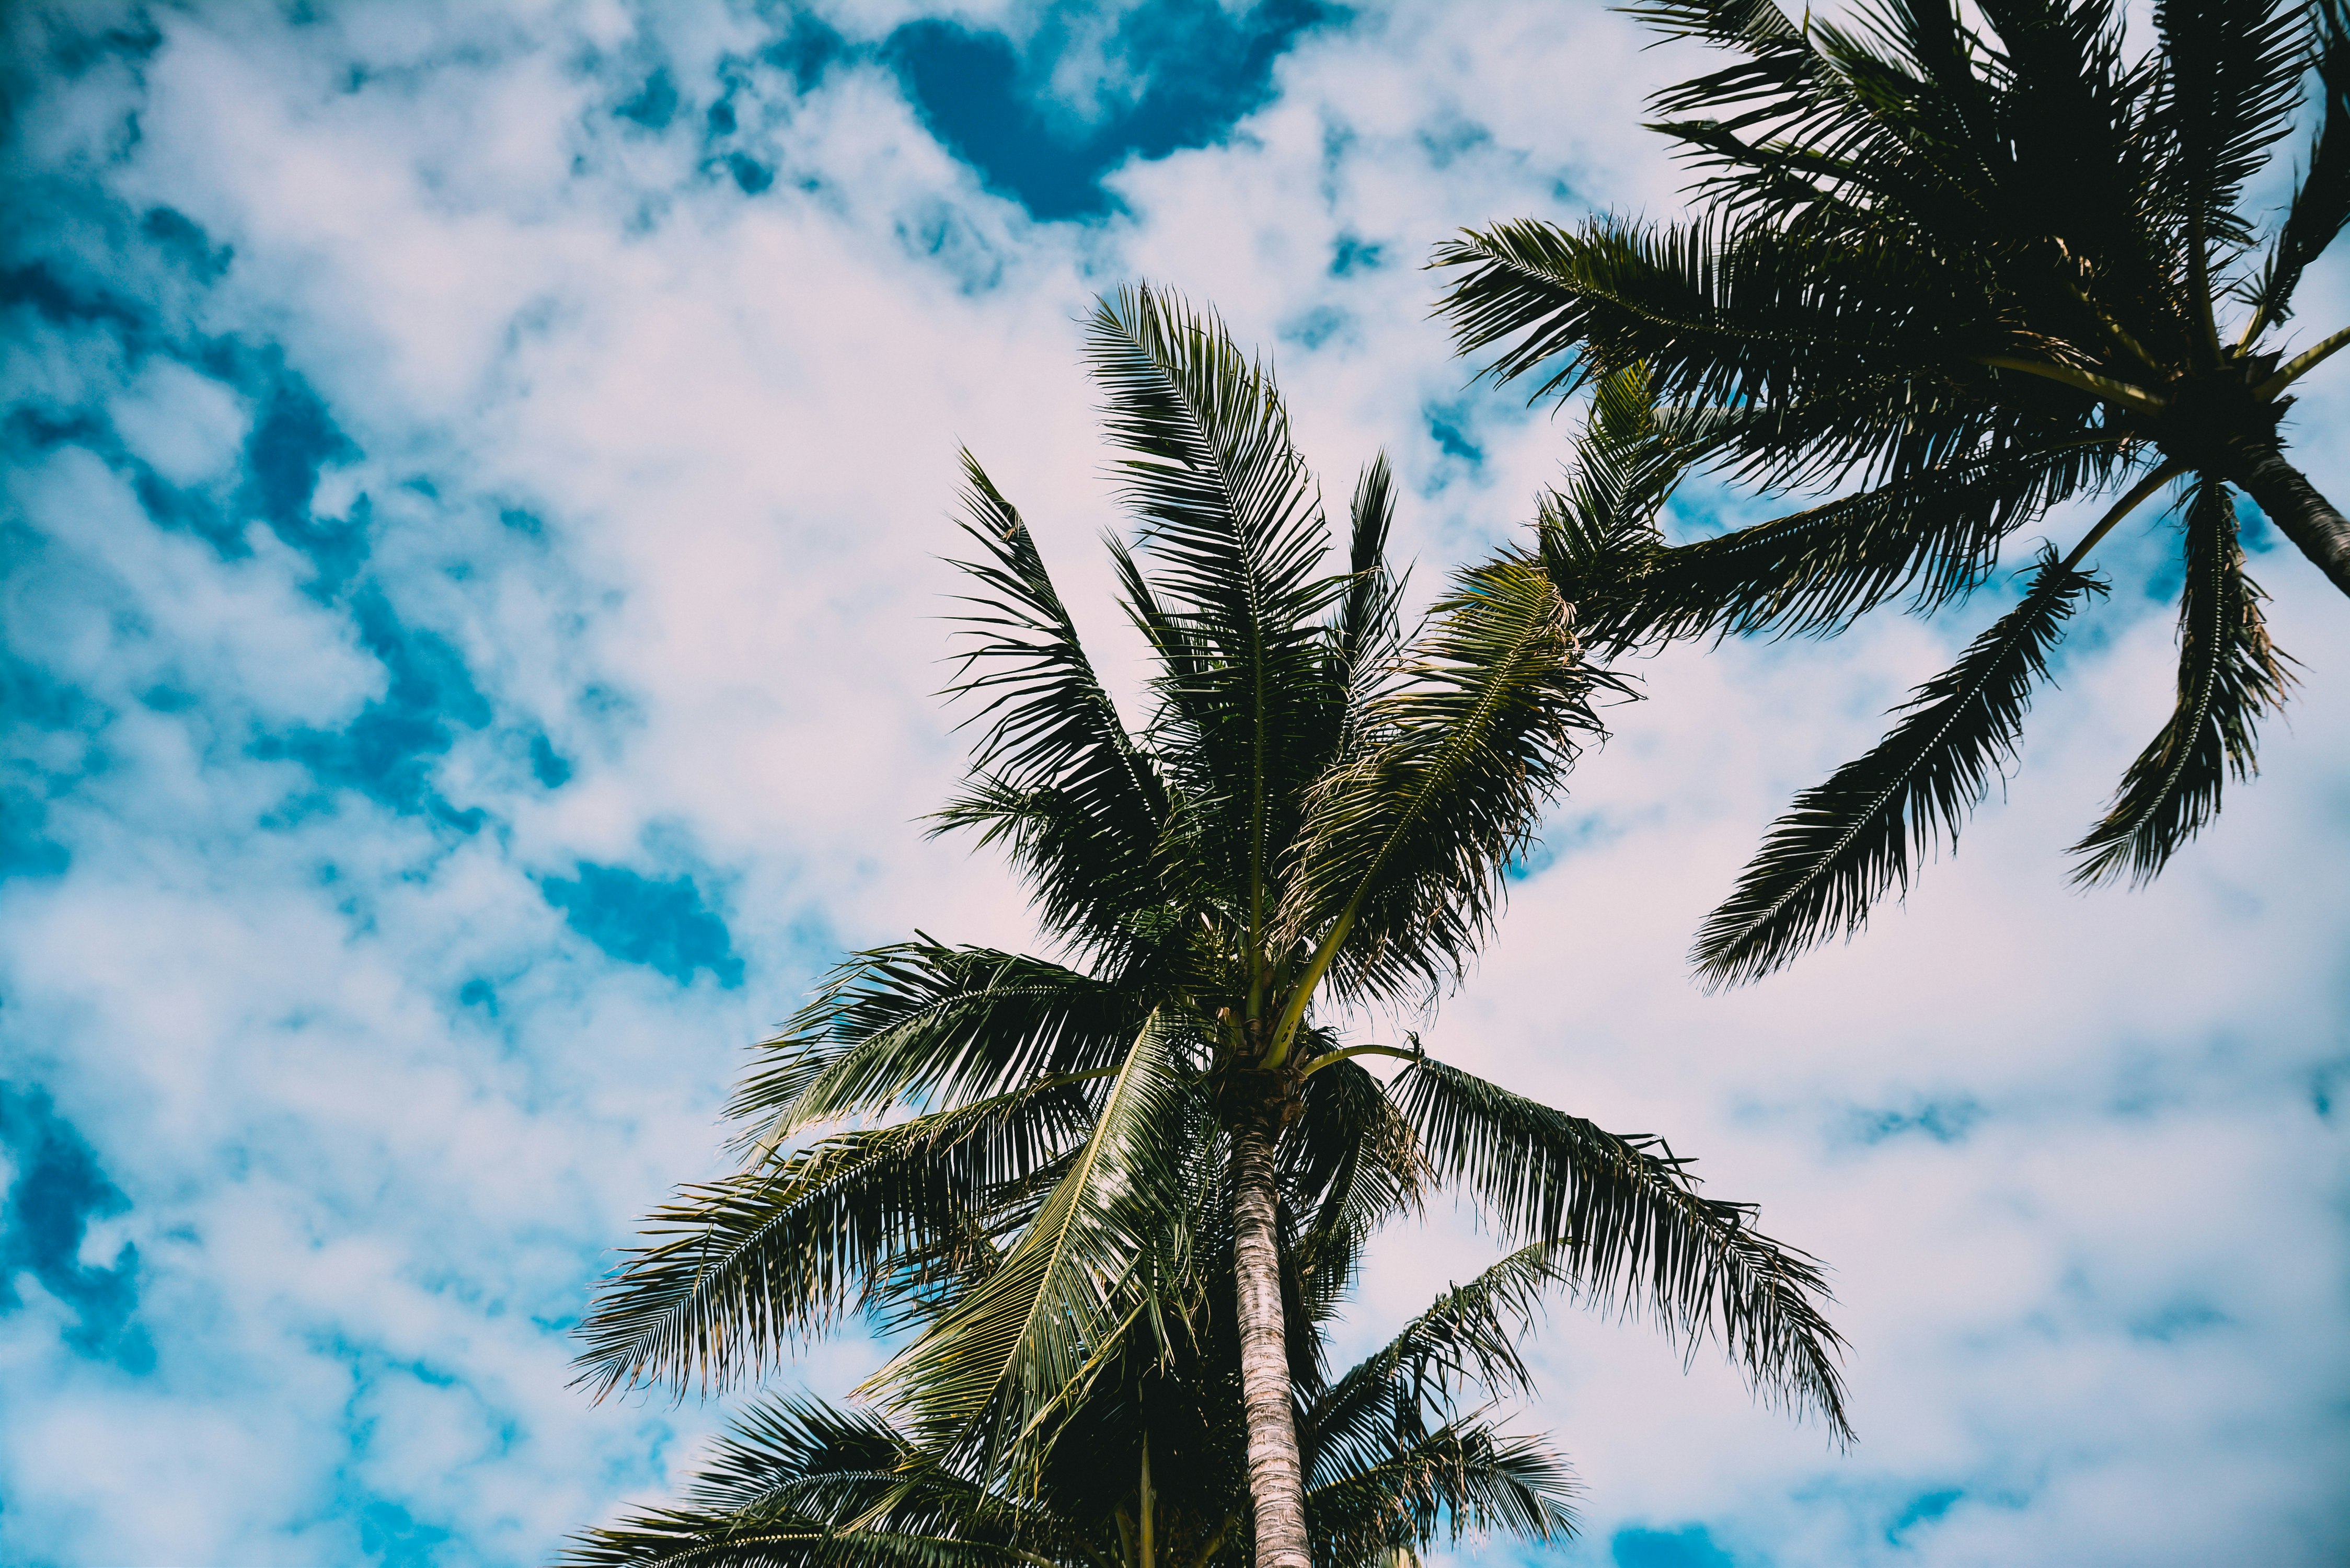 low angle photography of two palm trees under cloudy sky during daytime